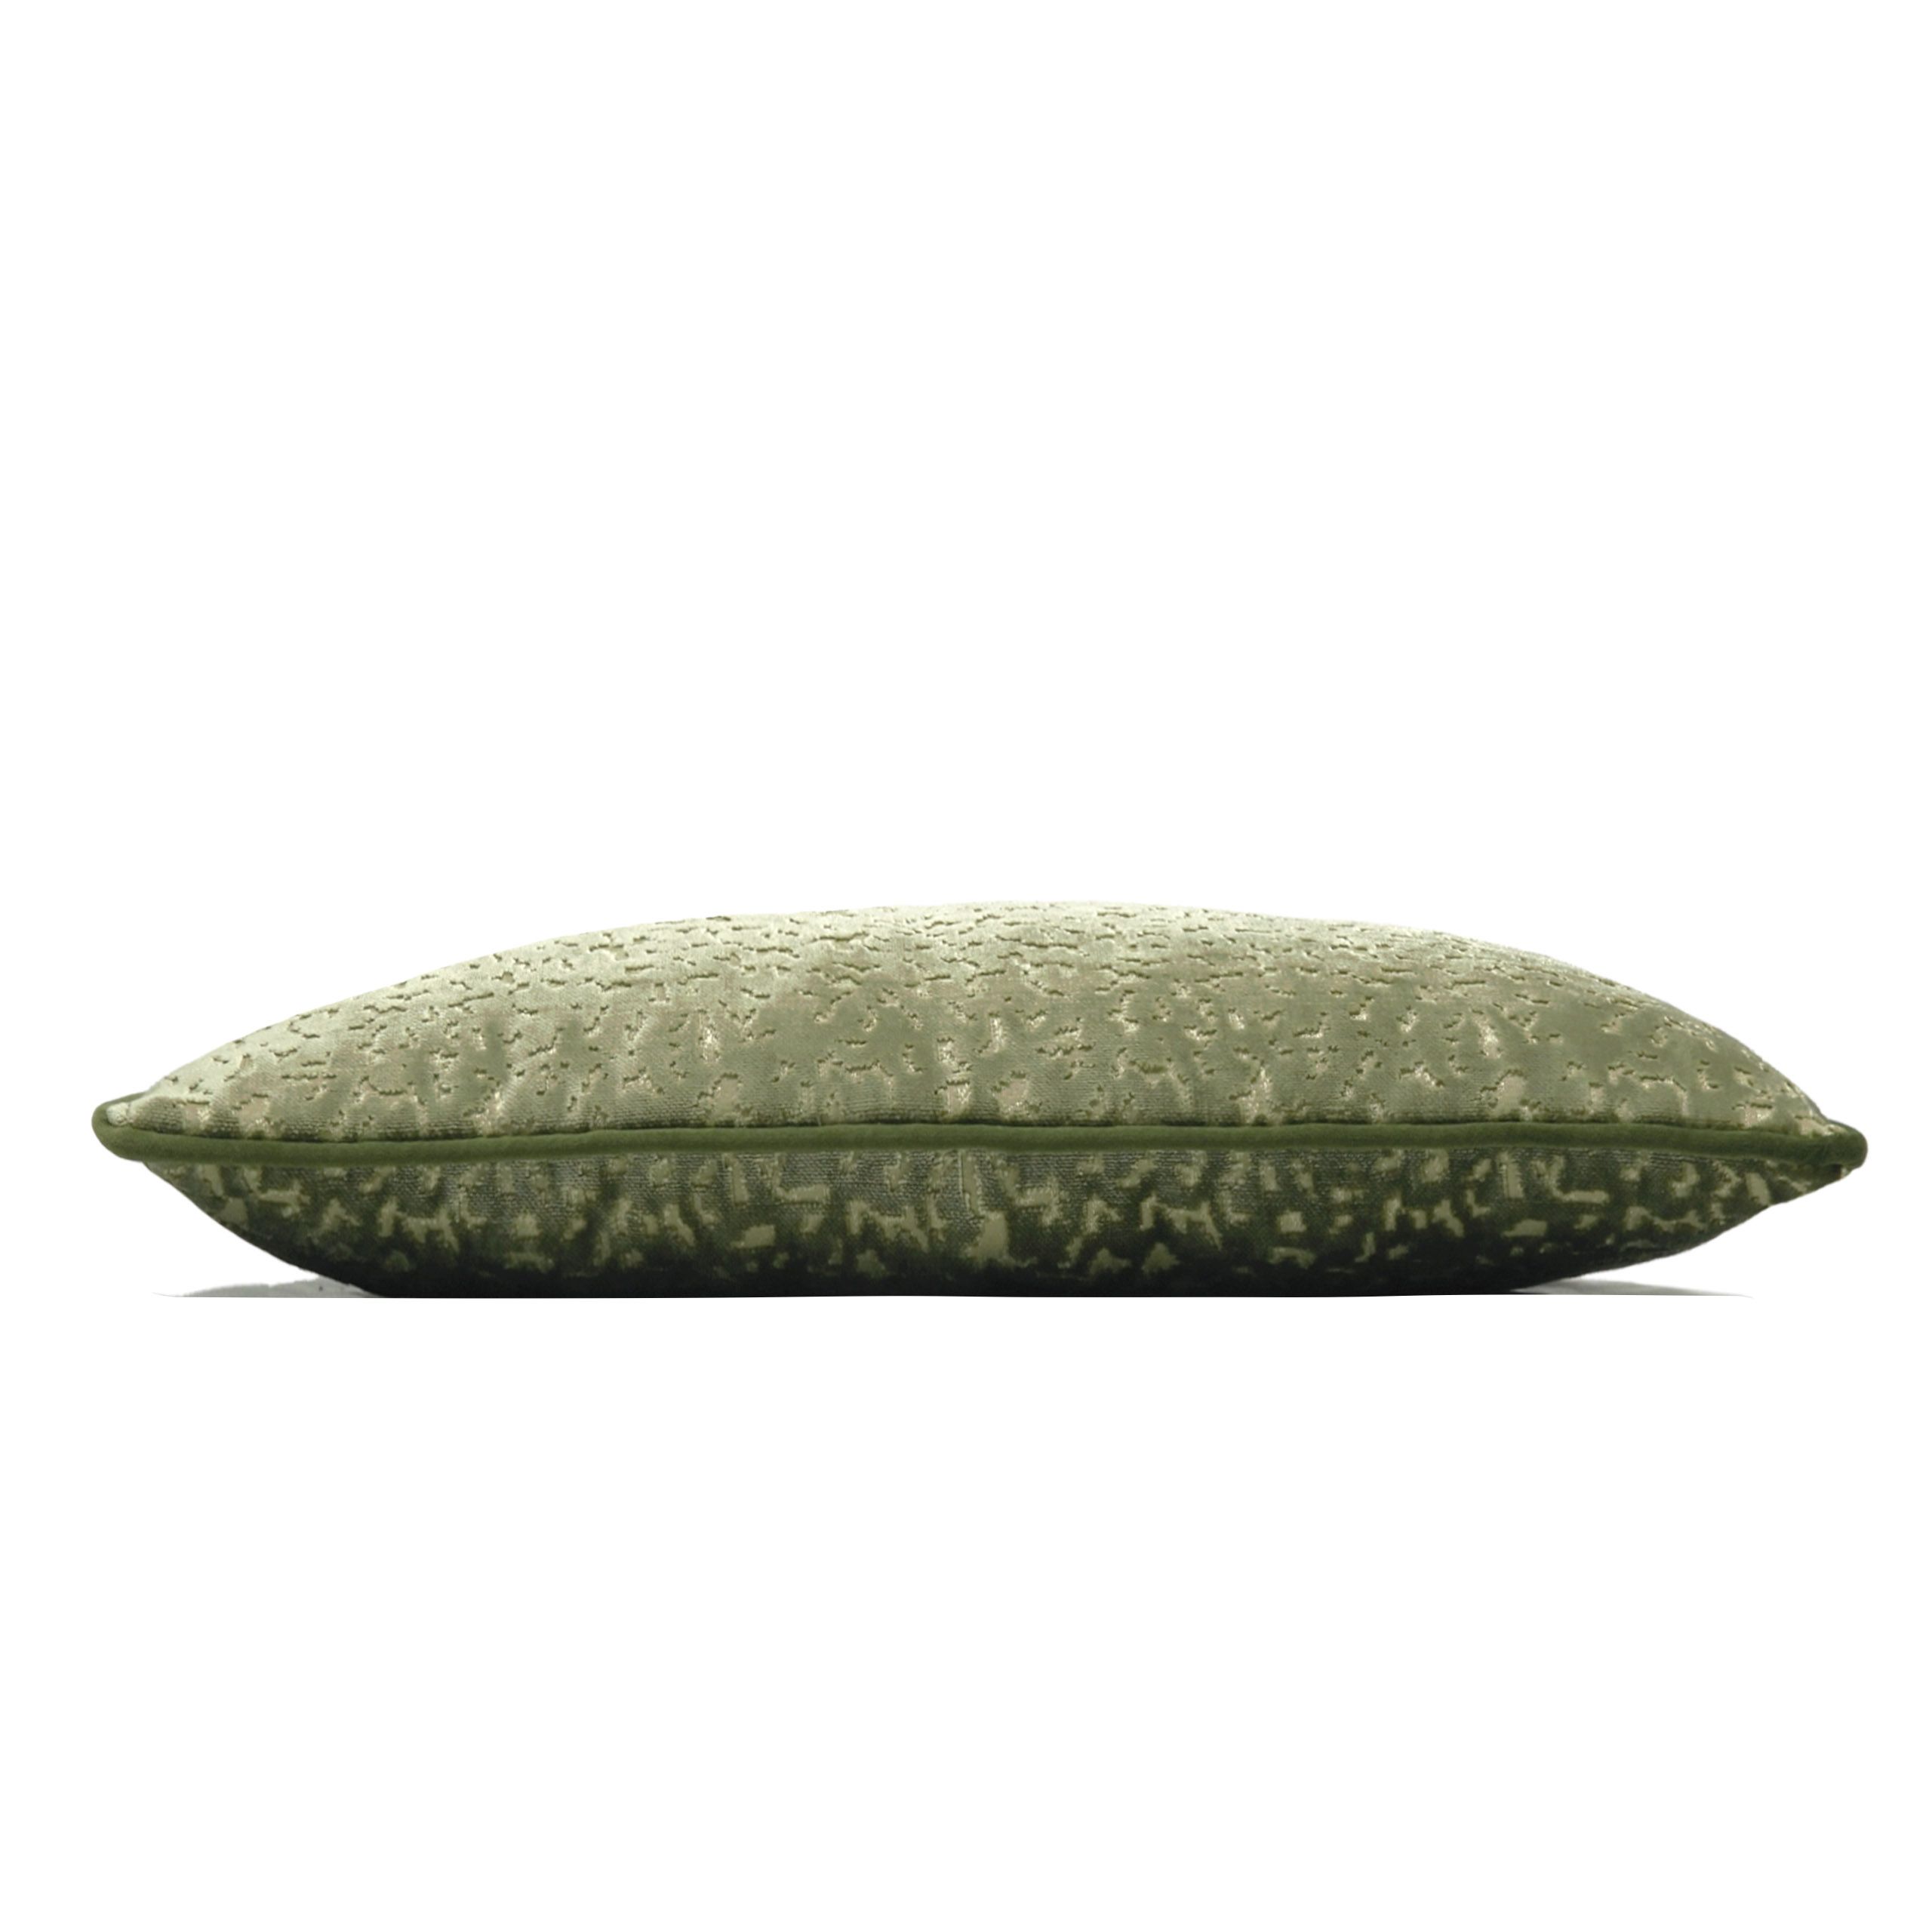 A luxurious sculpted velvet cushion with exquisite co-ordinating plain velvet piping.